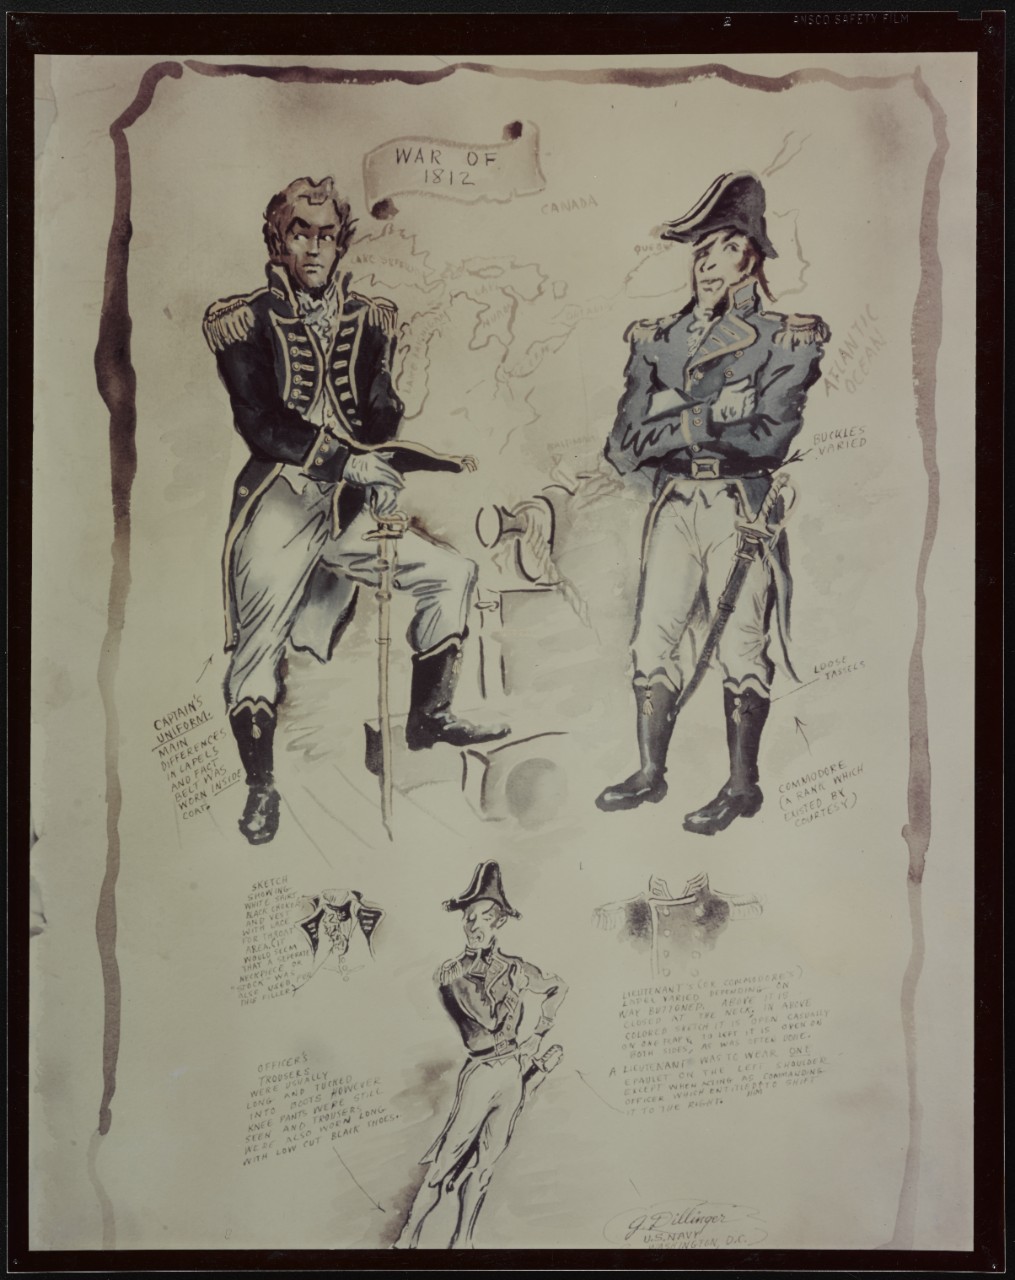 Drawing of Uniforms, Captain and Commodore's Uniforms from War of 1812